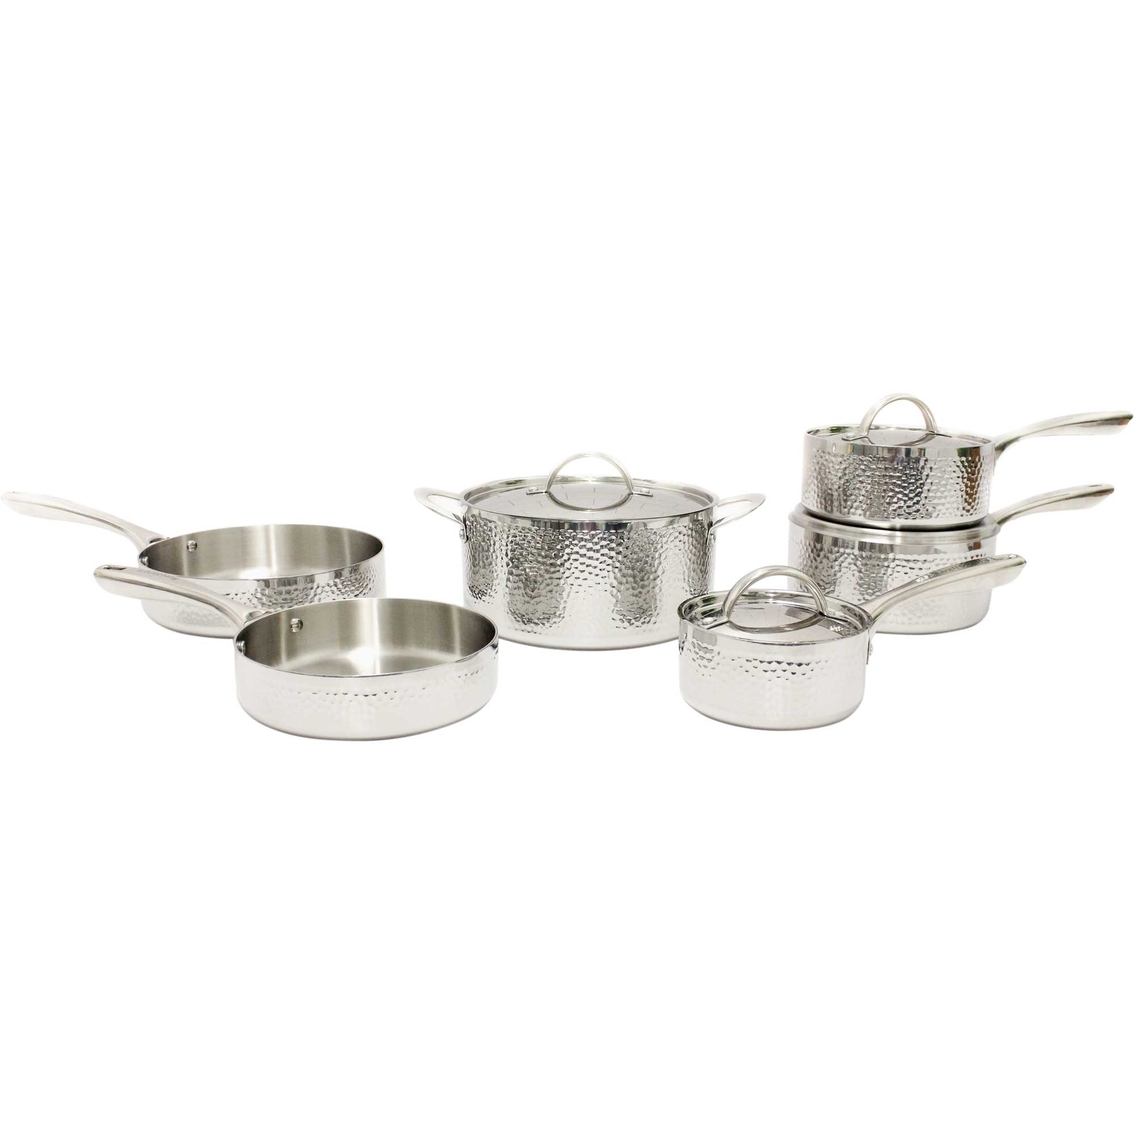 Berghoff's Vintage Hammered Tri Ply Stainless Steel Cookware 10 pc. Set - Image 2 of 10